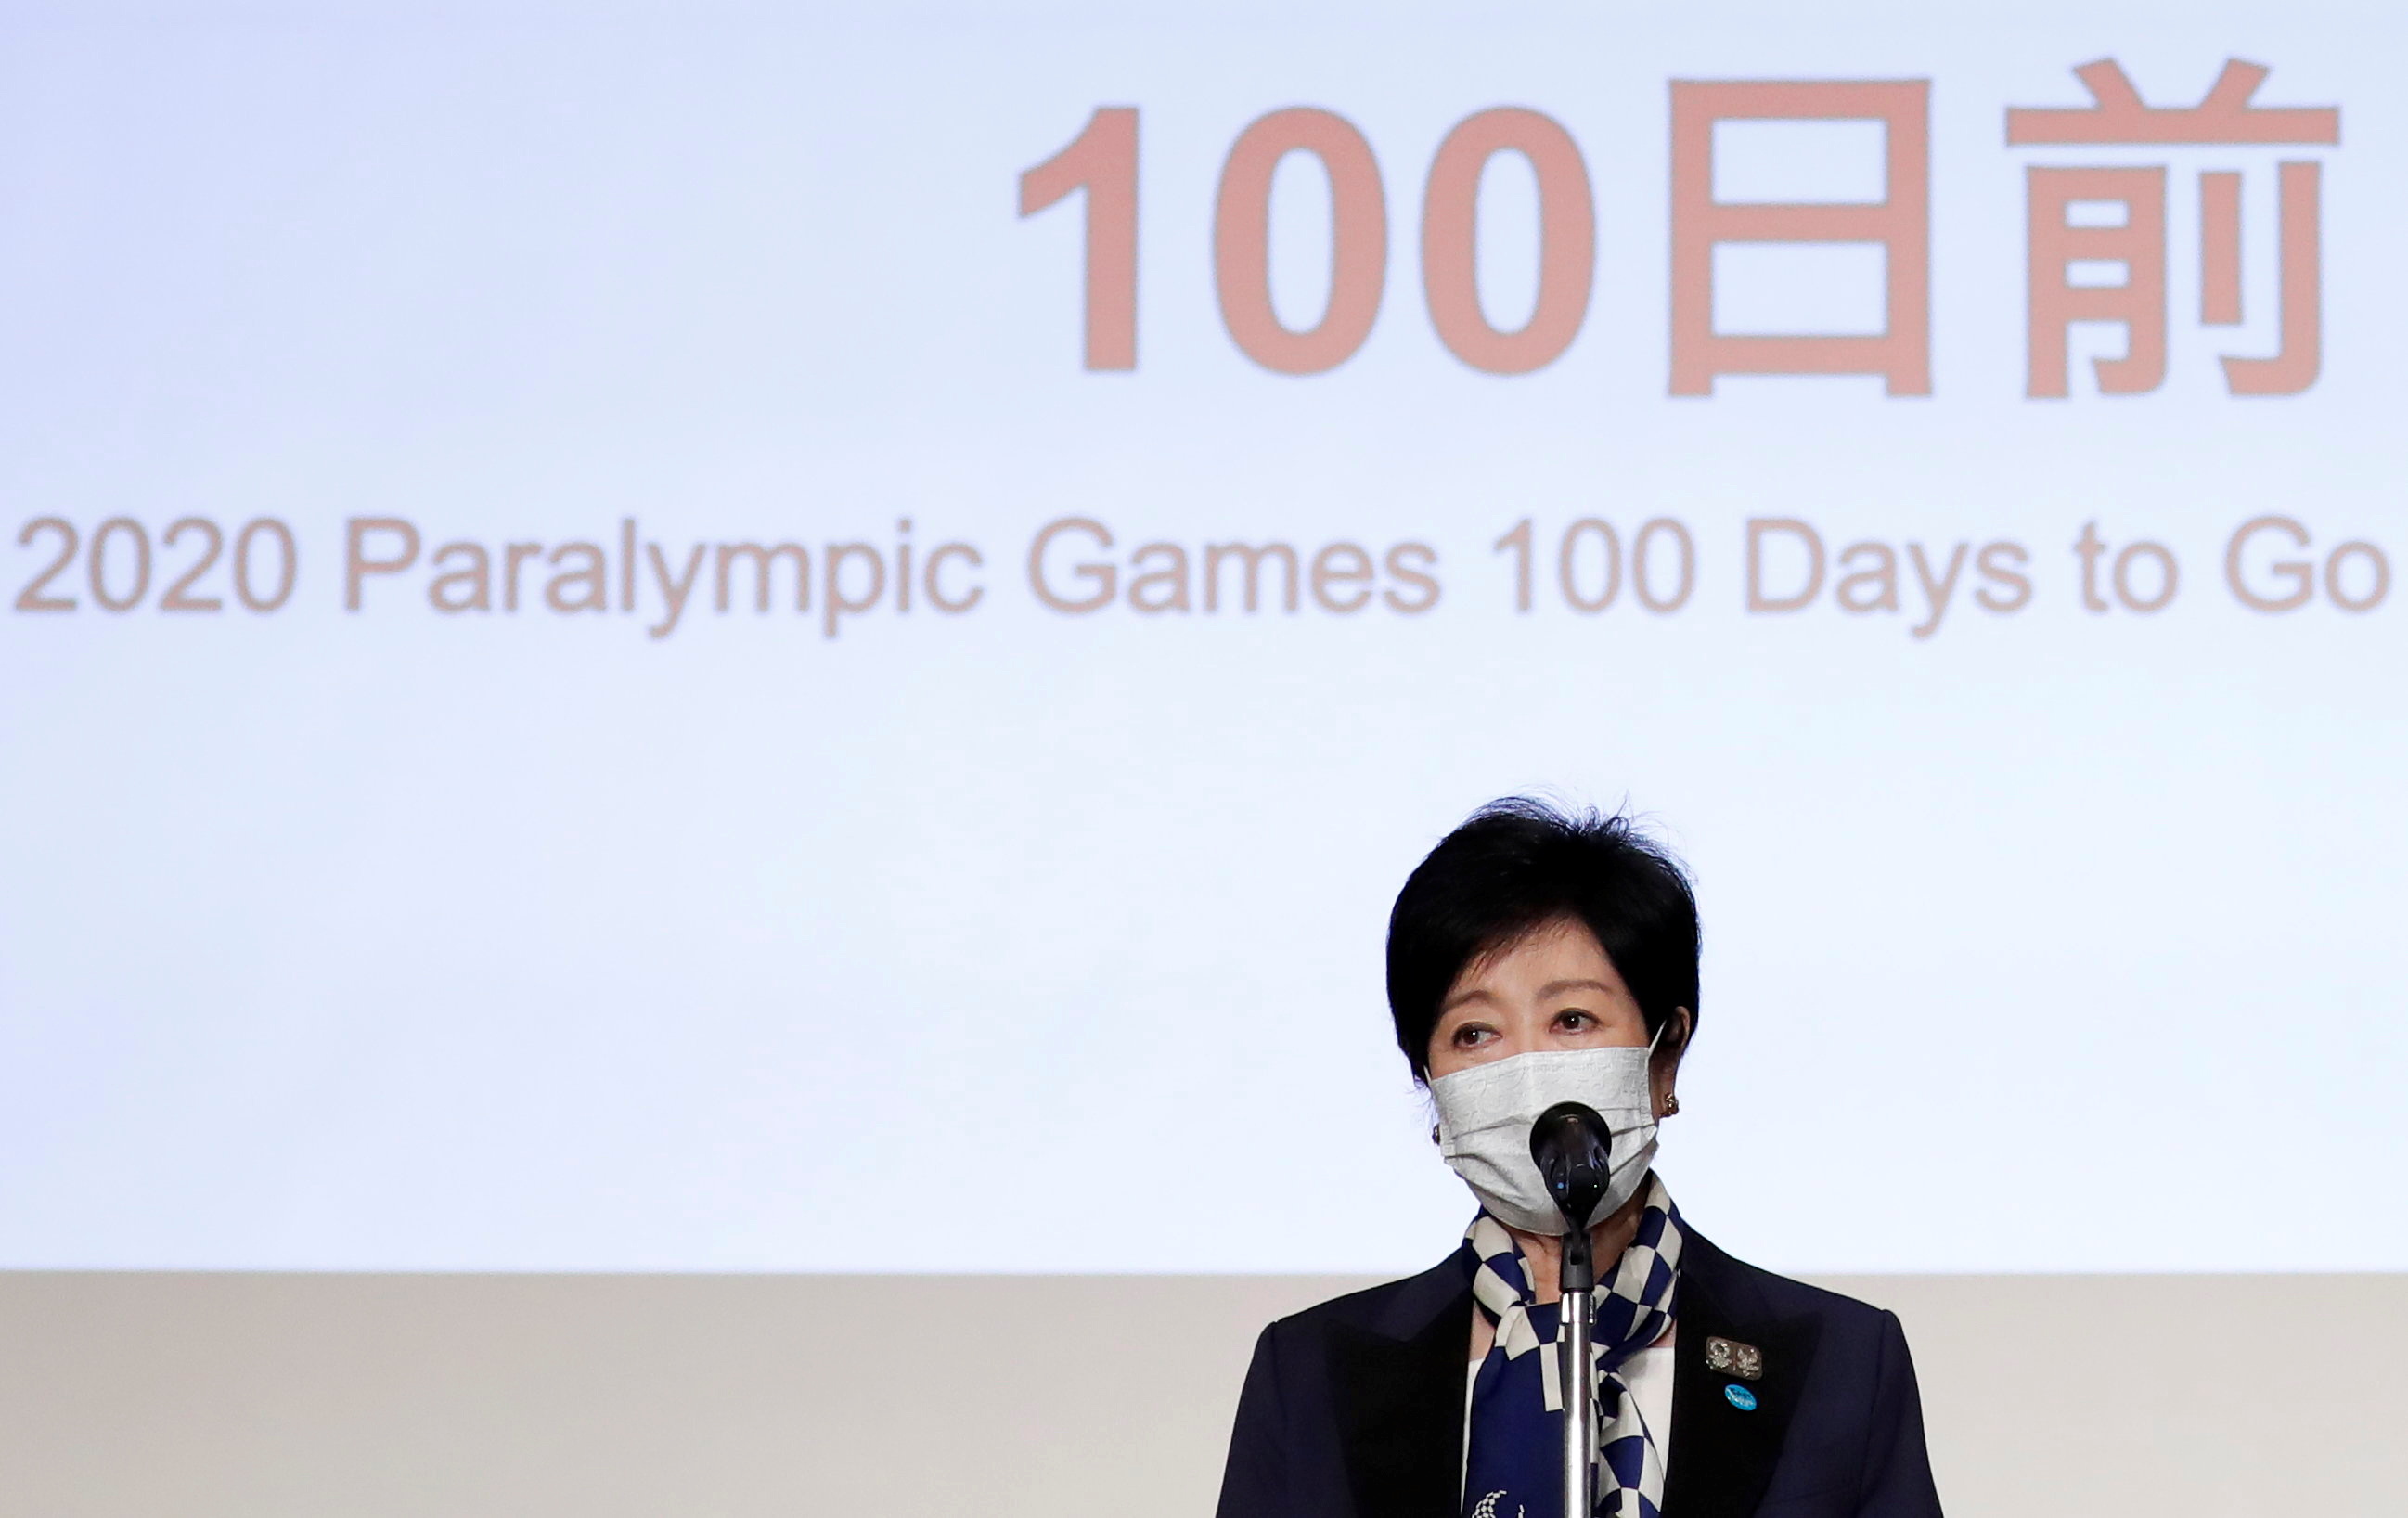 Tokyo Governor Yuriko Koike delivers a speech during  a ceremony to mark 100 days until the opening of the Tokyo 2020 Paralympic Games that have been postponed to 2021 due to the coronavirus disease (COVID-19) outbreak, at Tokyo Metropolitan Government building in Tokyo, Japan May 16, 2021. REUTERS/Issei Kato/Pool